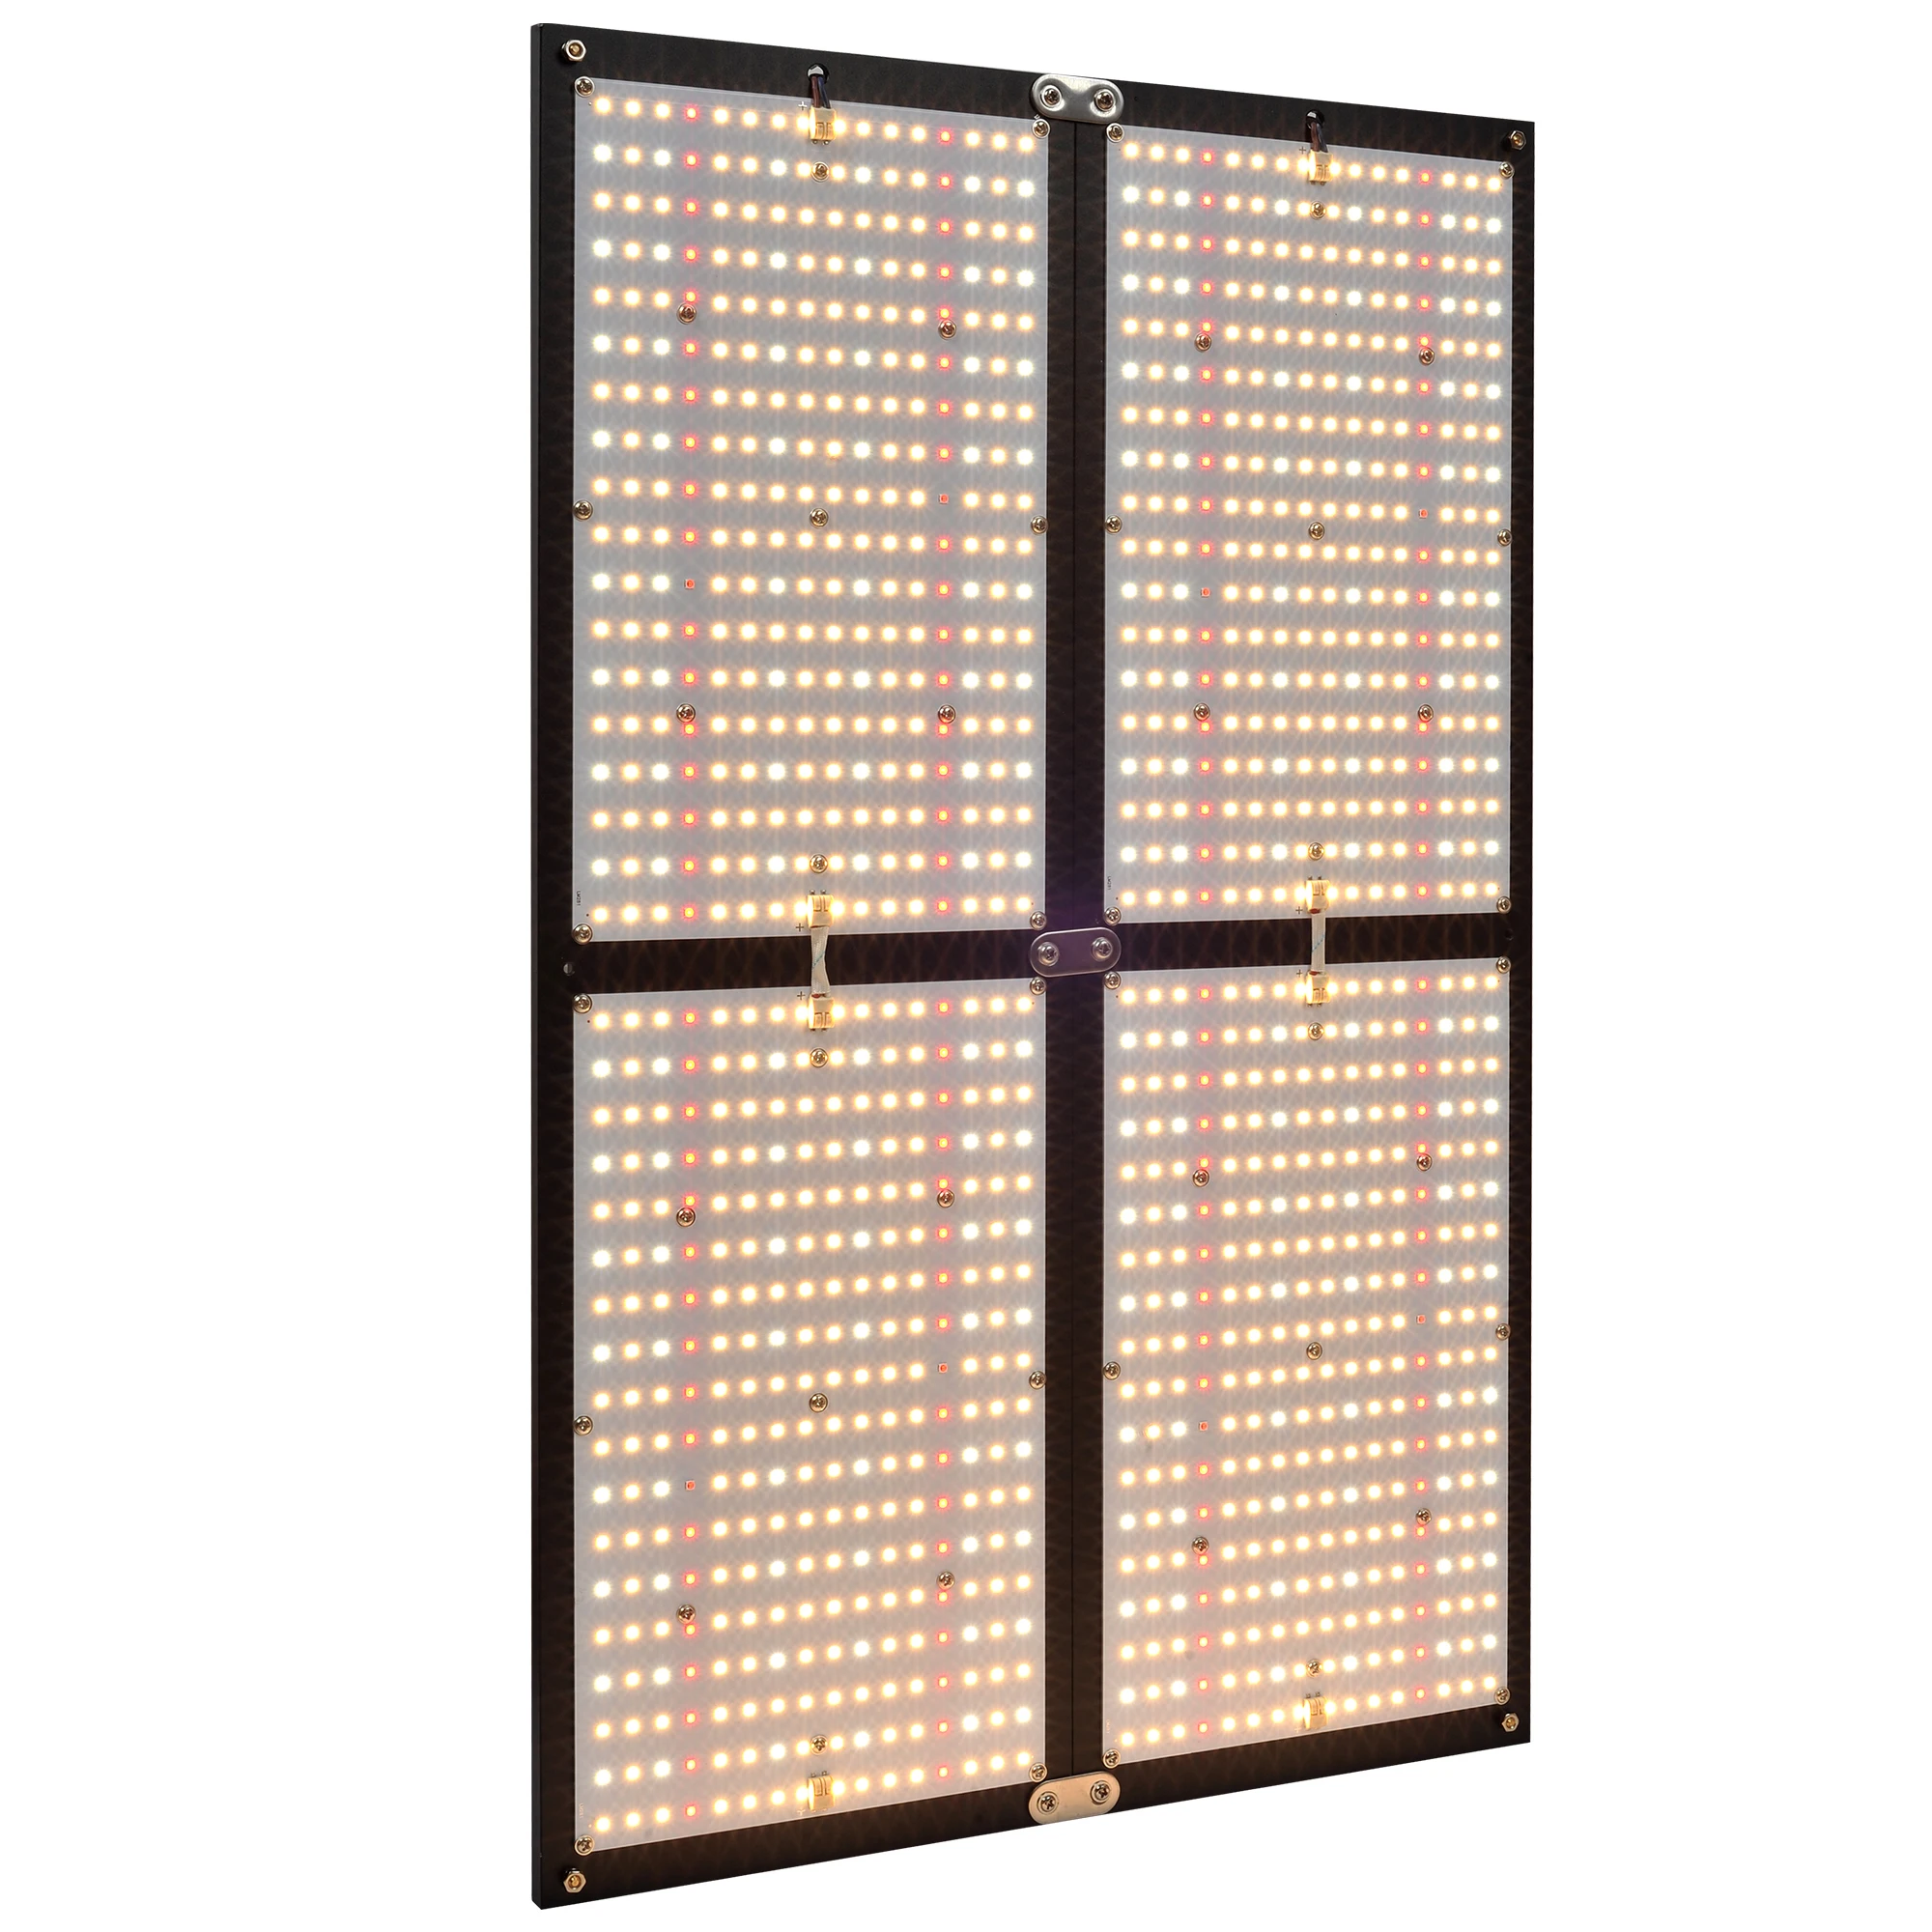 

480W Quantum Led Grow Light Board Samsung Diodes LED Board Built with 3000K 5000K 660nm IR Full Spectrum Grow Board